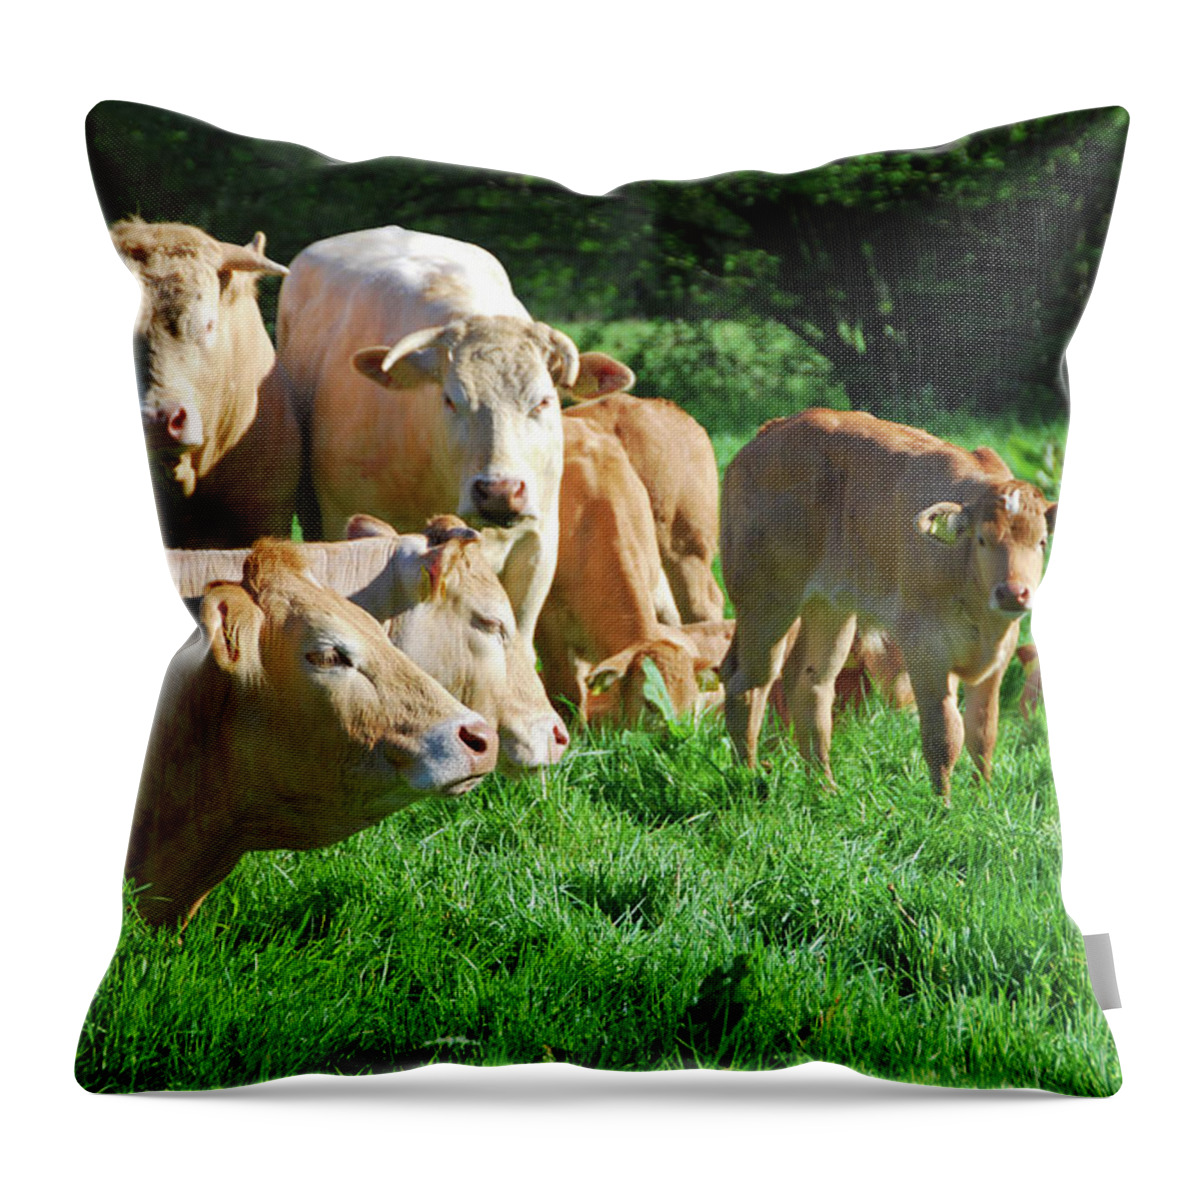 North Brabant Throw Pillow featuring the photograph Herd Of Charolais Cattle by 49pauly